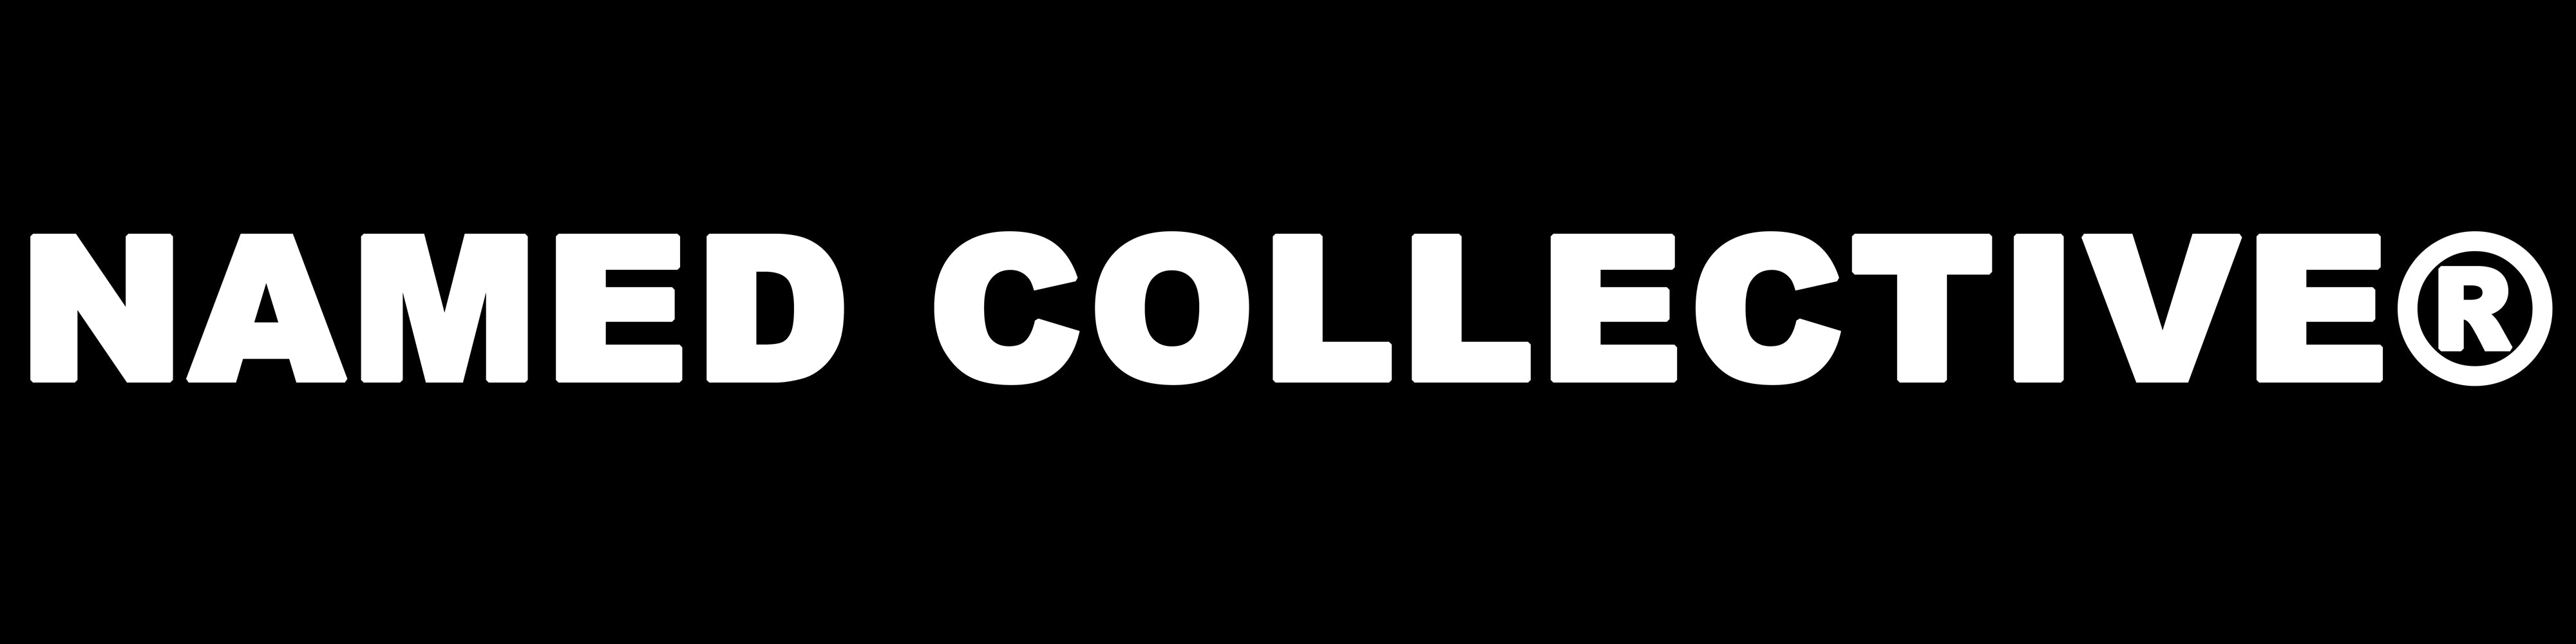 NAMED COLLECTIVE®